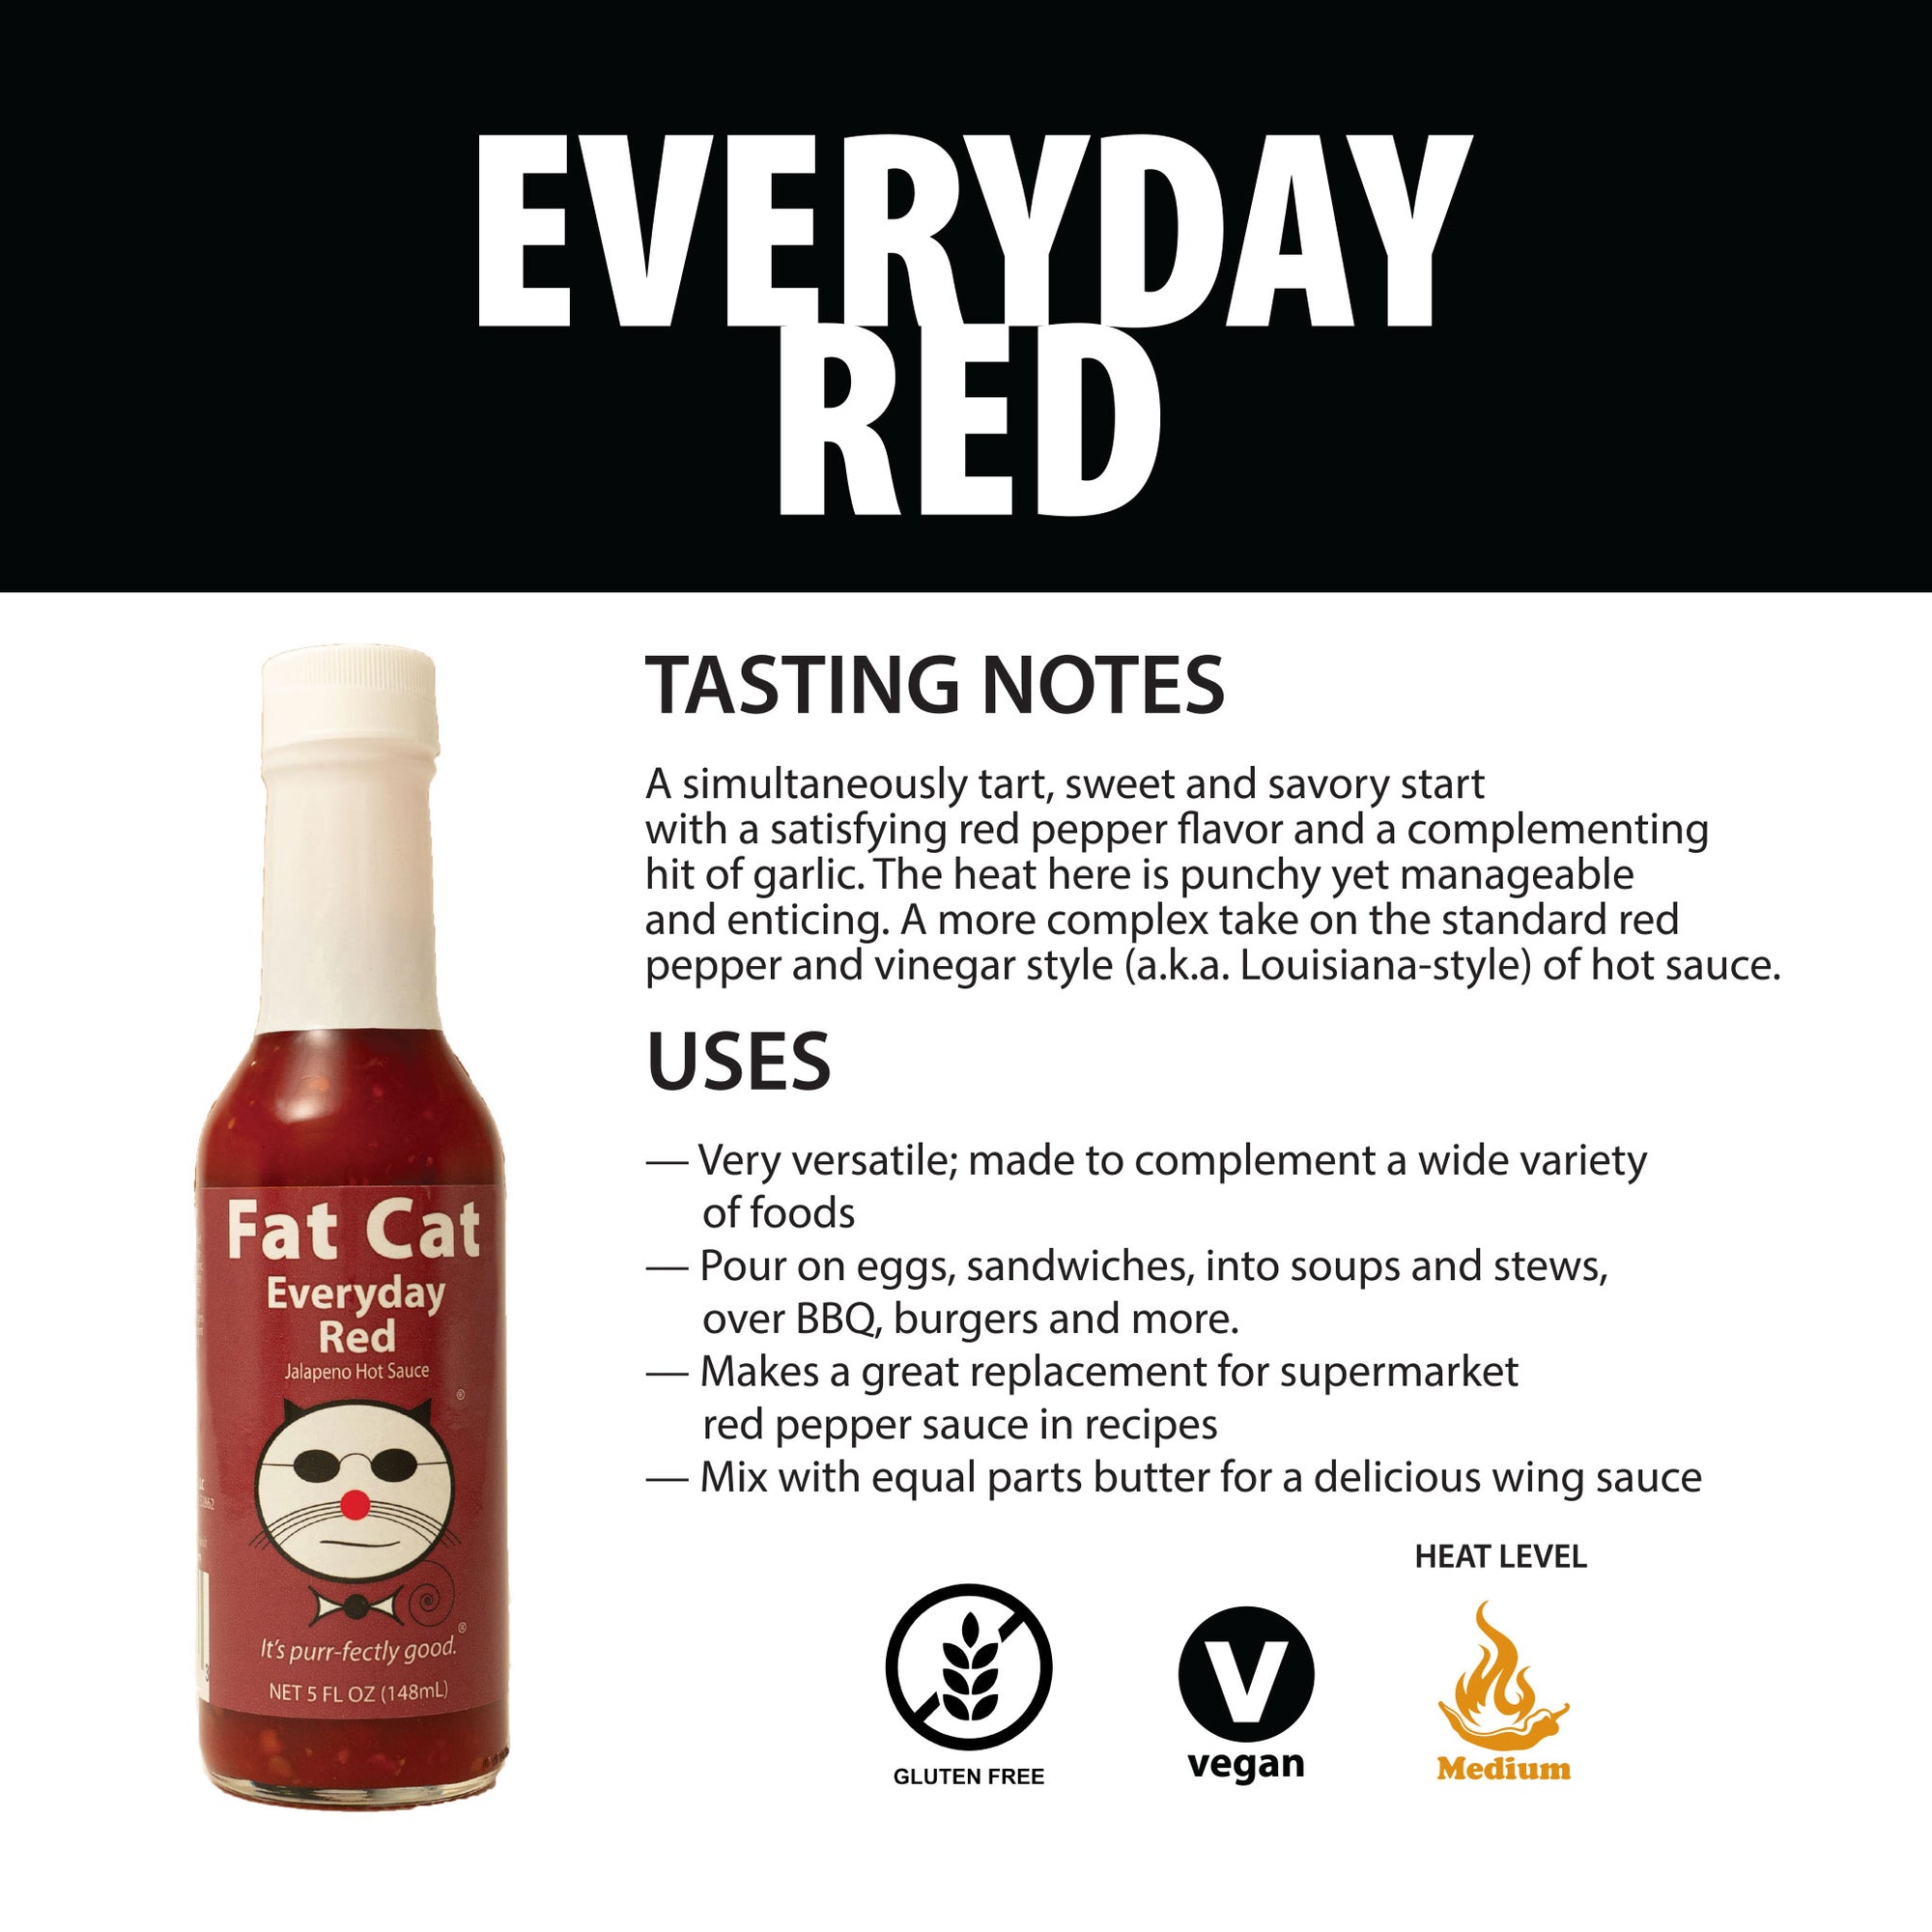 Fat-Cat-Gourmet-Everyday-Red-Jalapeno-Hot-Sauce-Tasting-Notes